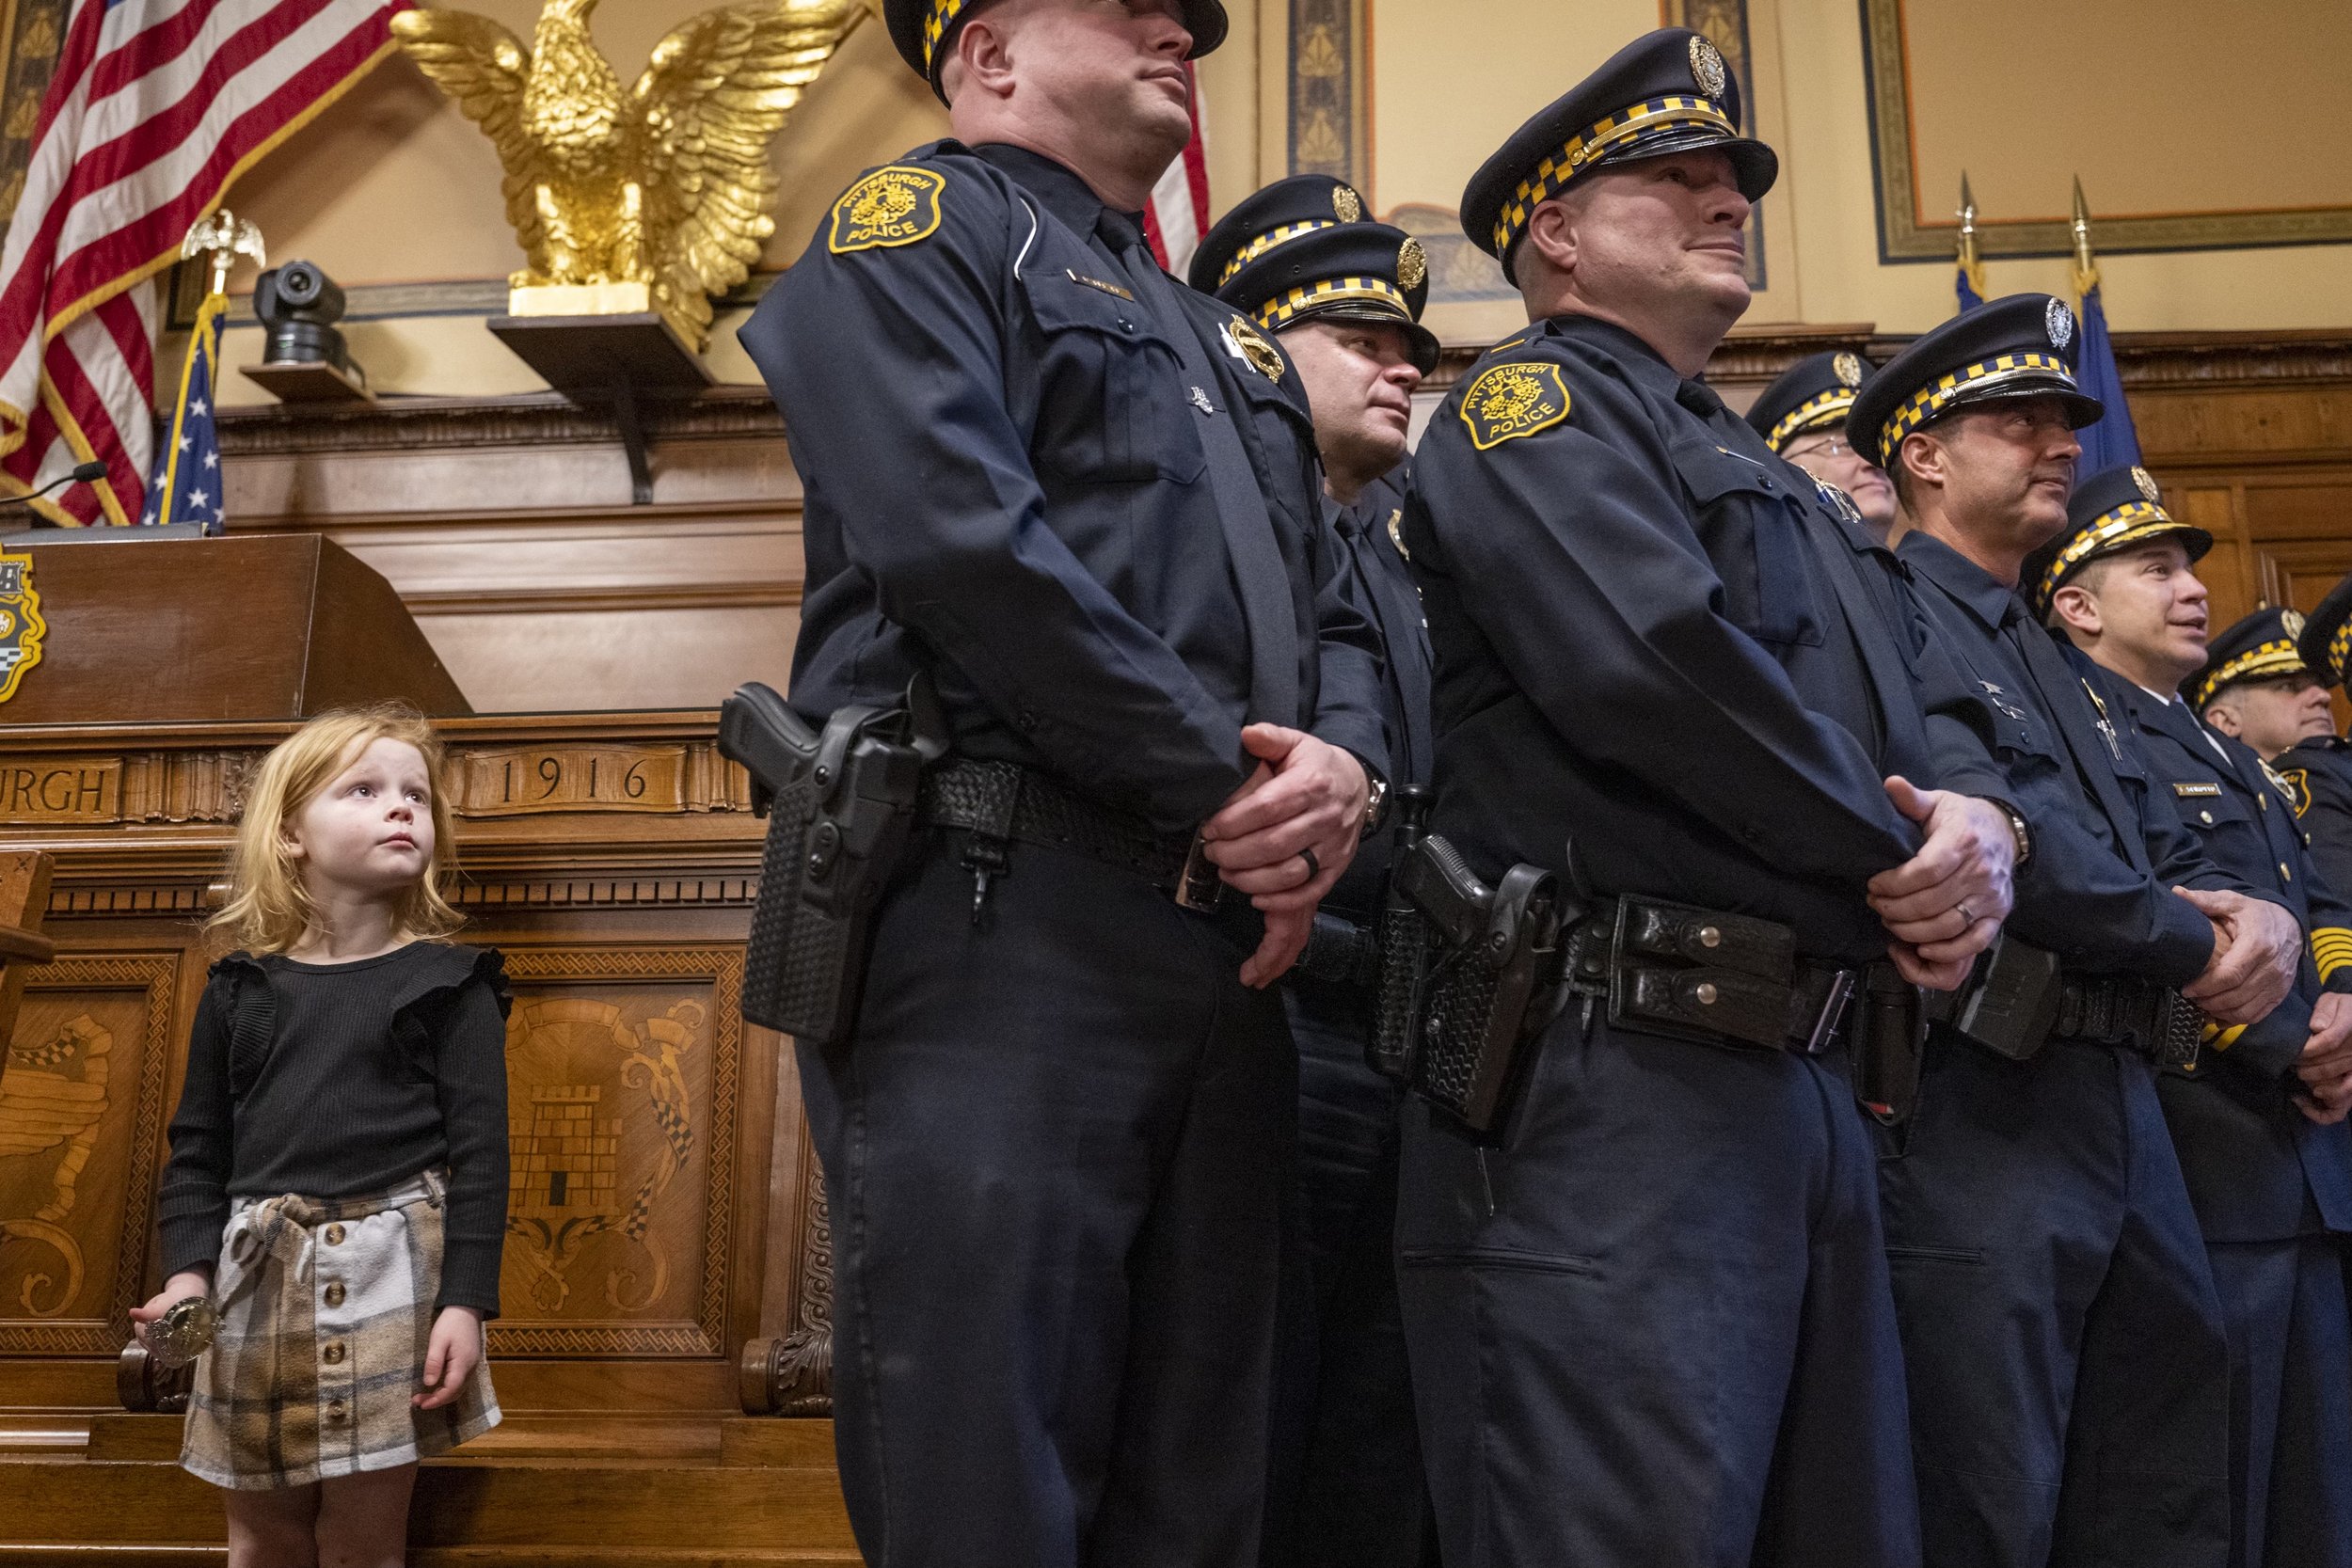  Elle Fleske, 5, left, stands to the side of Policemen and women as they take a group photo after being promoted in rank inside the Council Chambers at the City-County Building on Friday, Feb. 9, 2024, Downtown. Elle’s Father, William Fleske, was pro